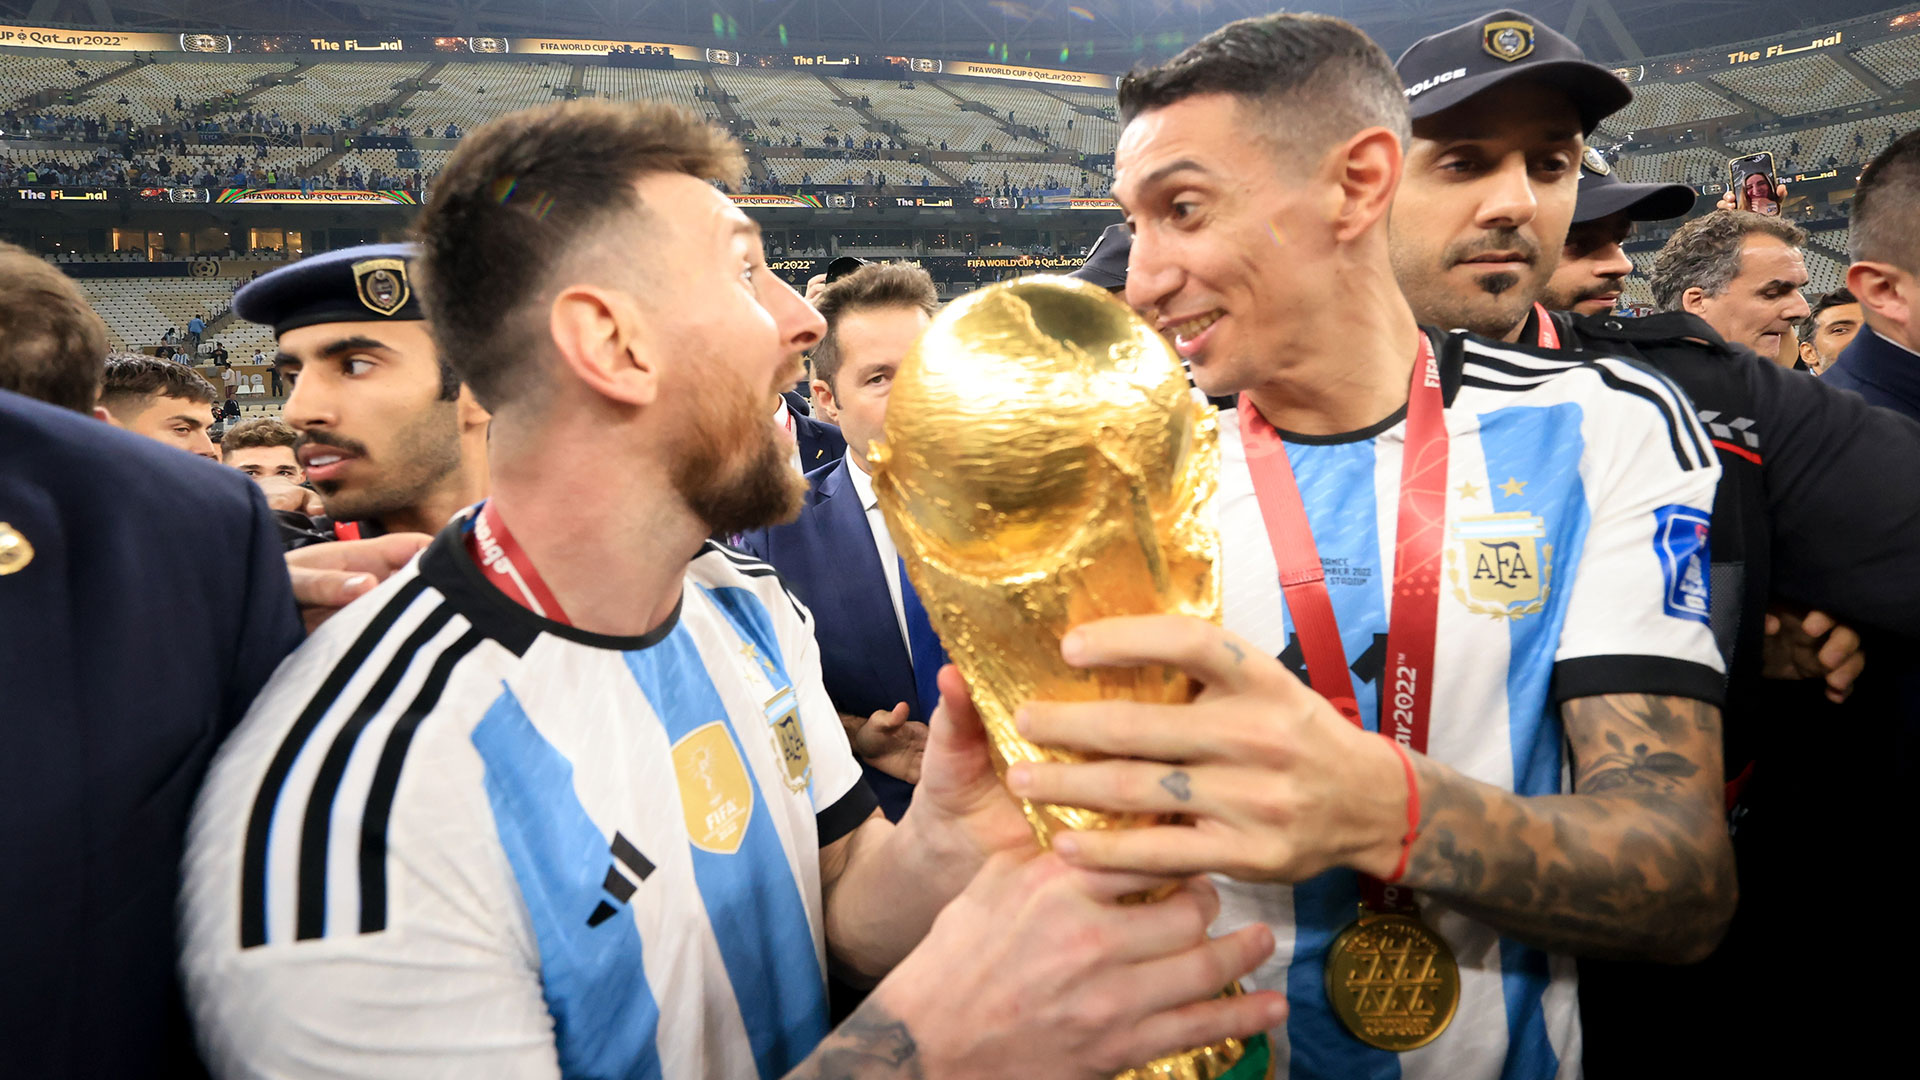 LUSAIL CITY, QATAR - DECEMBER 18: Lionel Messi and Ángel Di María of Argentina hold the FIFA World Cup Qatar 2022 Winner's Trophy after winning the FIFA World Cup Qatar 2022 Final match between Argentina and France at Lusail Stadium on December 18, 2022 in Lusail City, Qatar. (Photo by Gustavo Pagano/Getty Images)